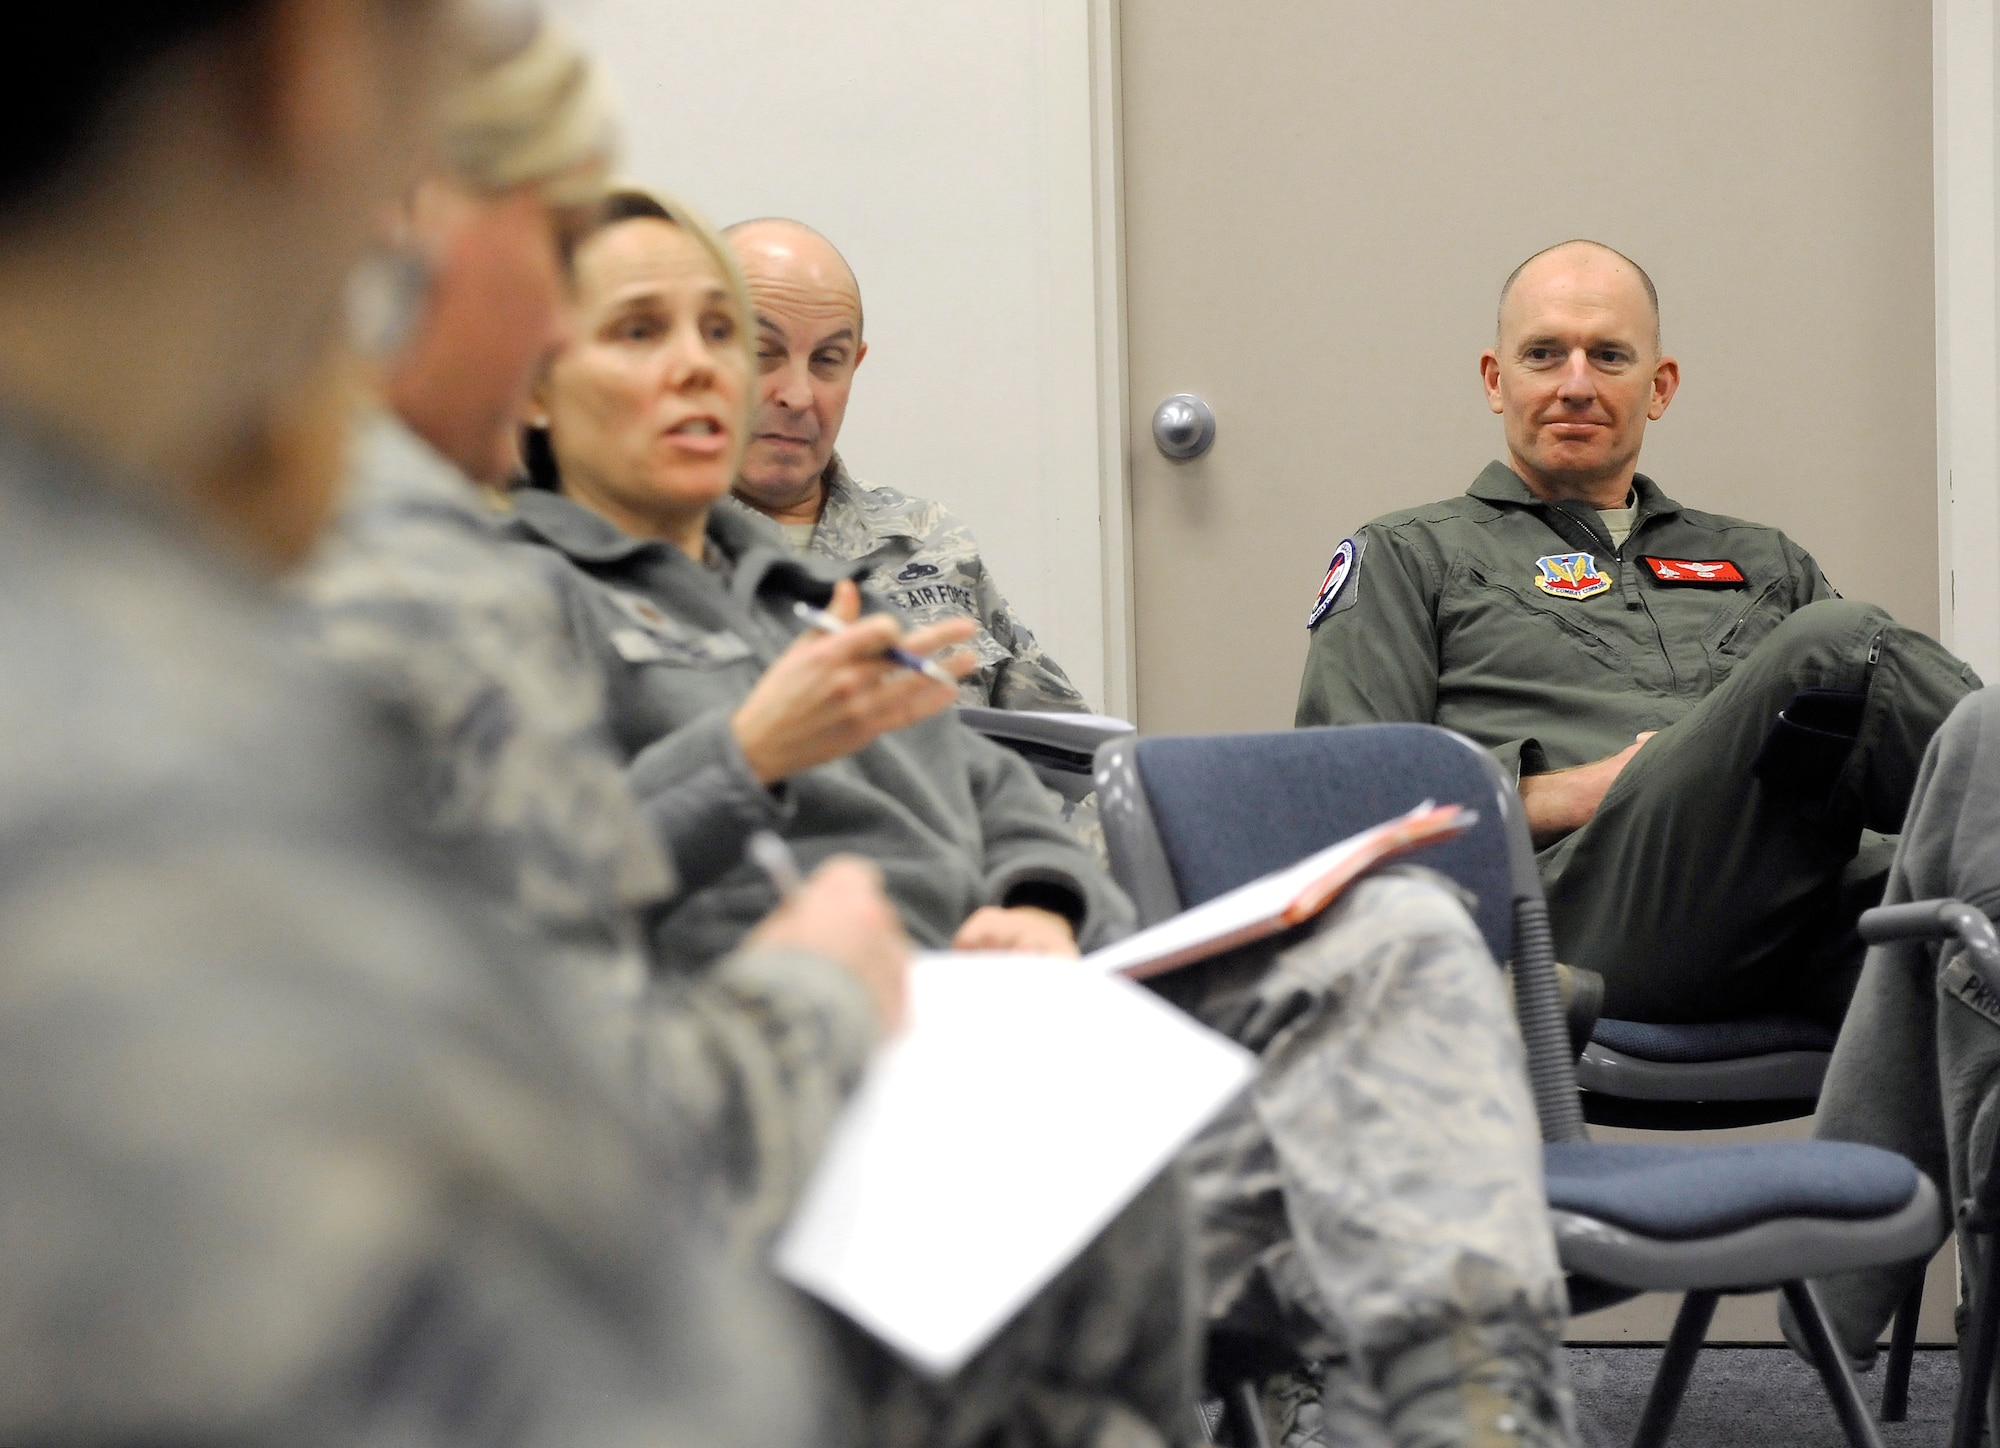 Oregon Air National Guard Col. Paul Fitzgerald, 142nd Fighter Wing Commander observes members interacting in a group discussion as part of the unit’s Diversity and Inclusion Counsel meeting, Jan. 11, 2015, Portland Air National Guard Base, Ore. The Diversity and Inclusion Counsel helps foster communication by recognizing that a diverse set of experiences, perspectives, and backgrounds are crucial to mission success. (U.S. Air National Guard photo by Tech. Sgt. John Hughel, 142nd Fighter Wing Public Affairs/Released)